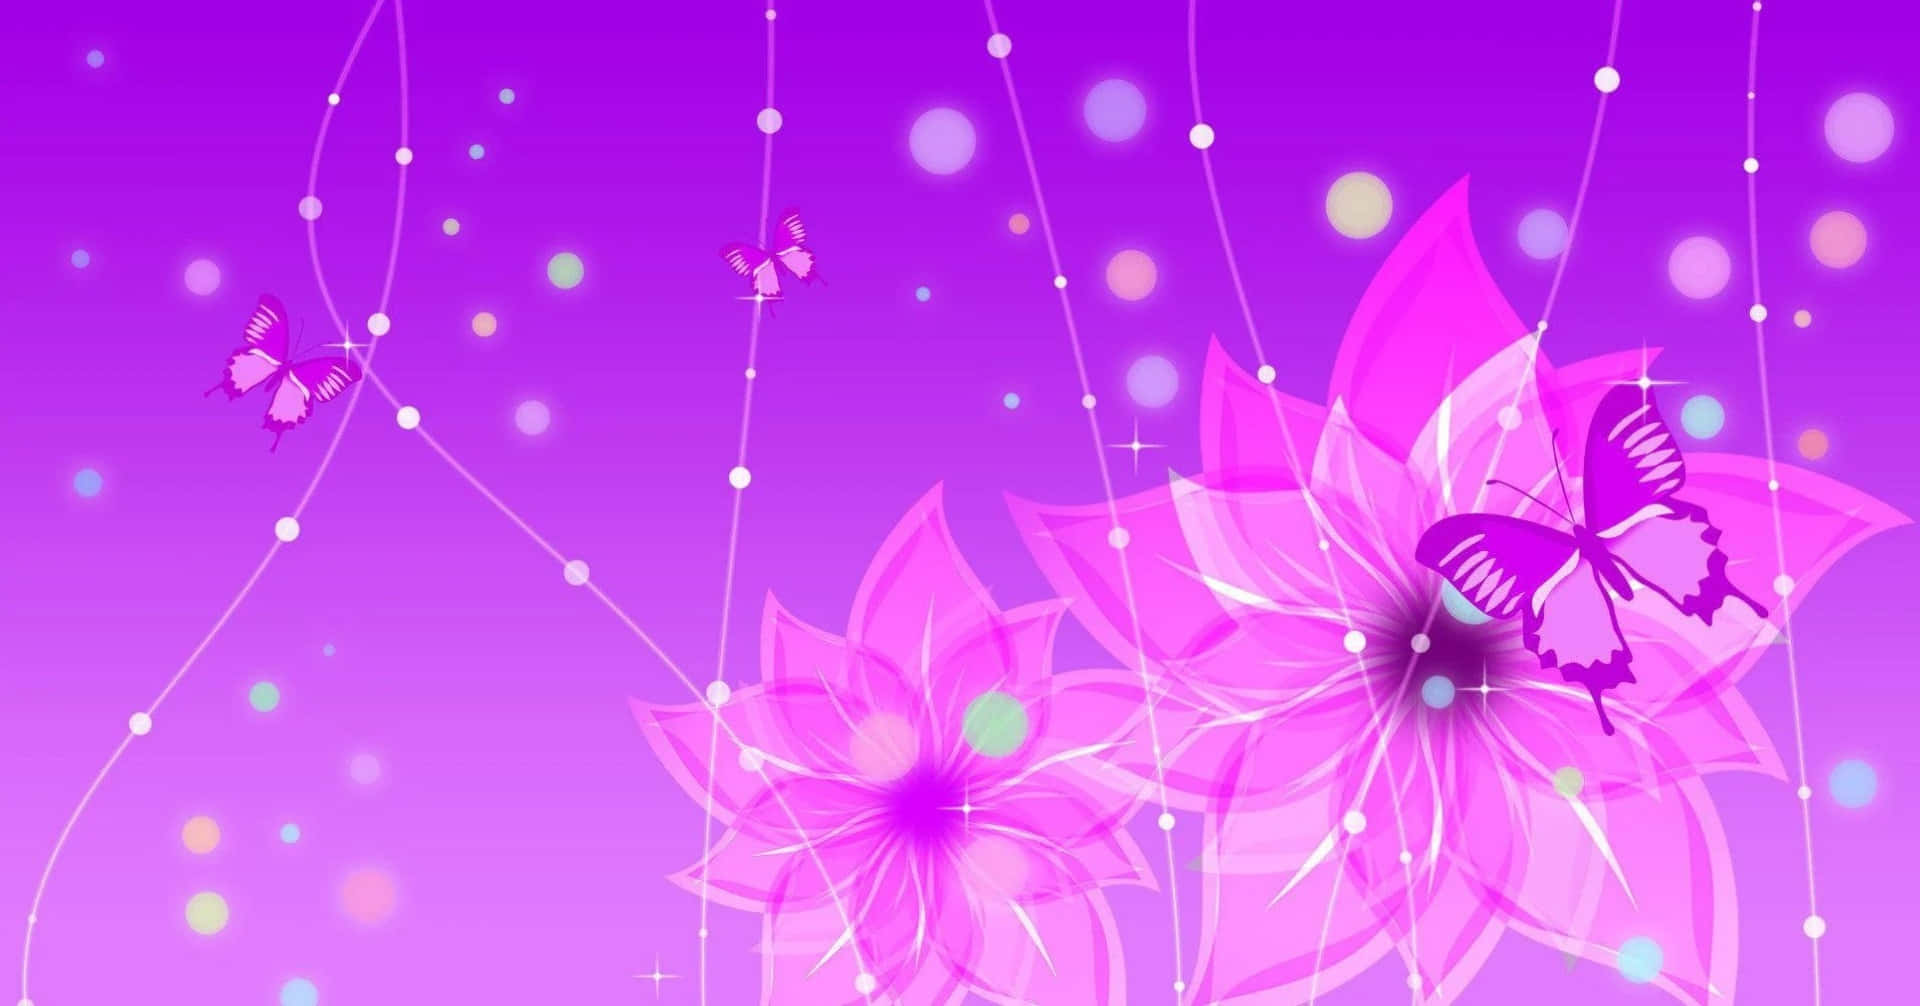 pretty pink and purple background